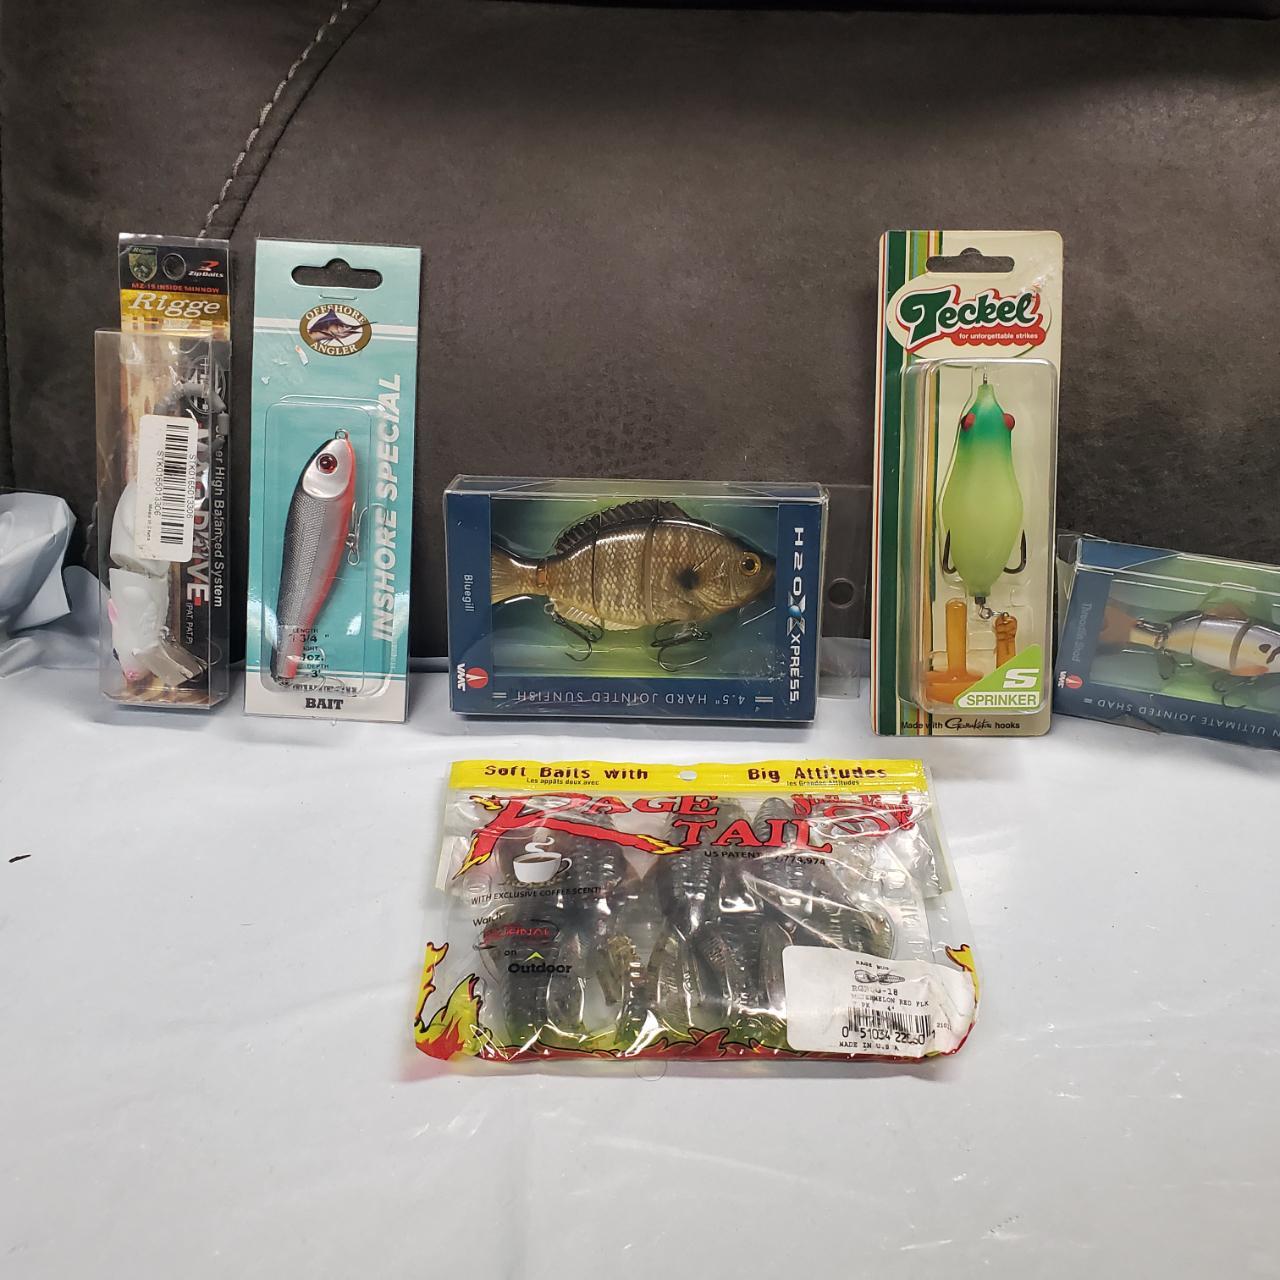 Fishing Accessories - Lot of 6. Includes: 1) H20 - Depop